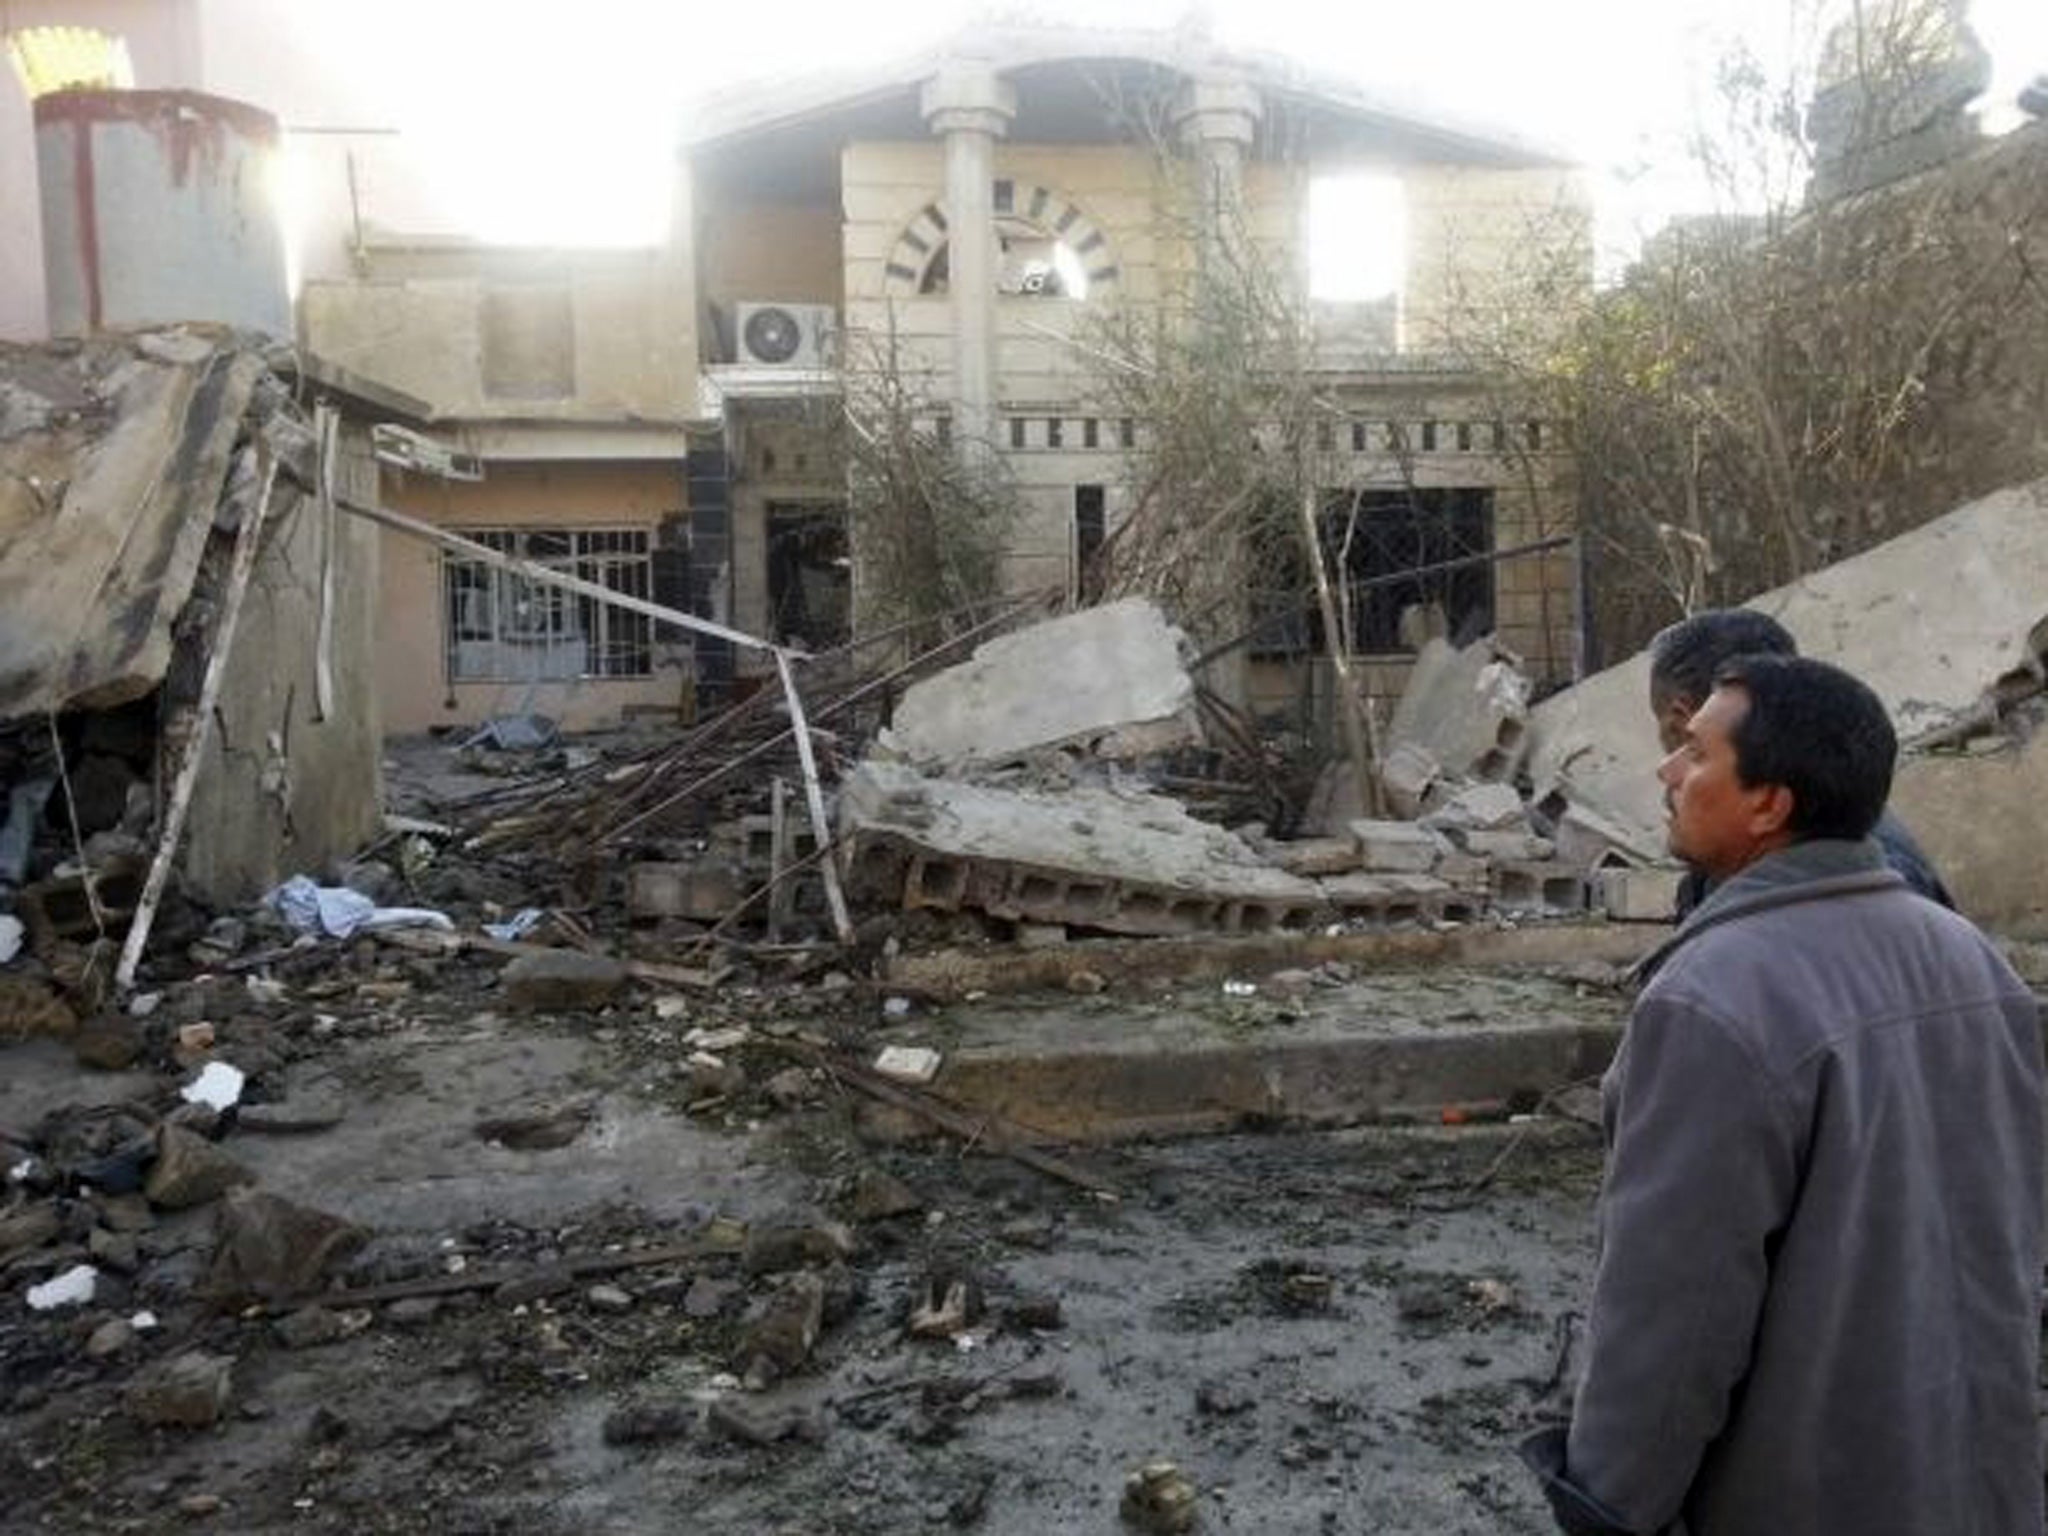 Civilians at the site of a car bomb attack in the town of Tuz Khurmatu, north of Baghdad